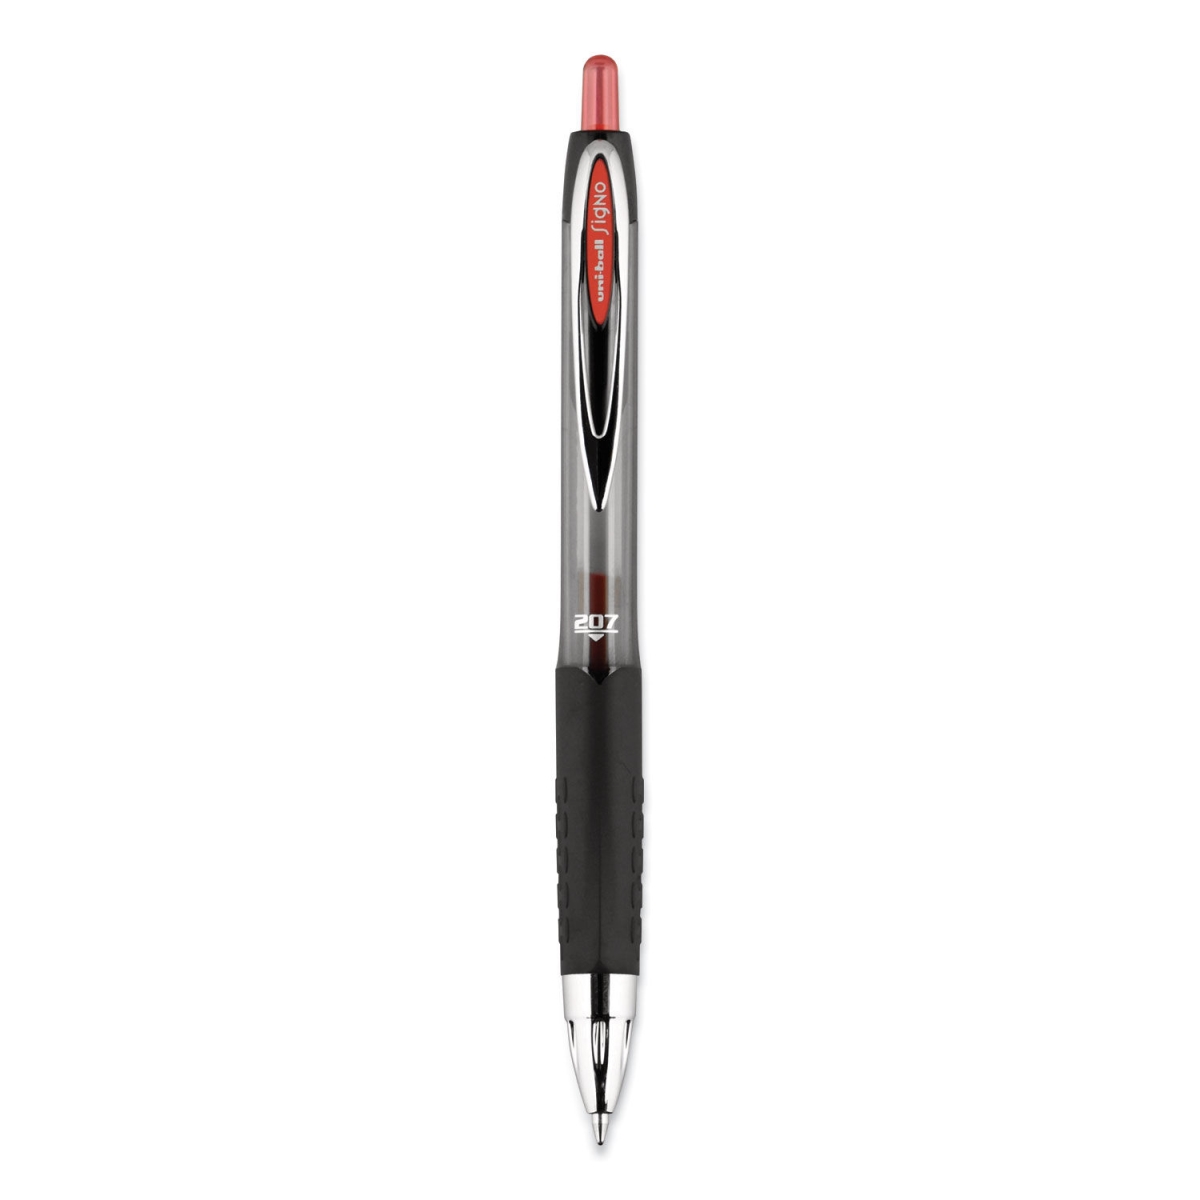 uni-ball UBC33952 0.7 mm 207 Retractable Gel Pen, Red - Pack of 12